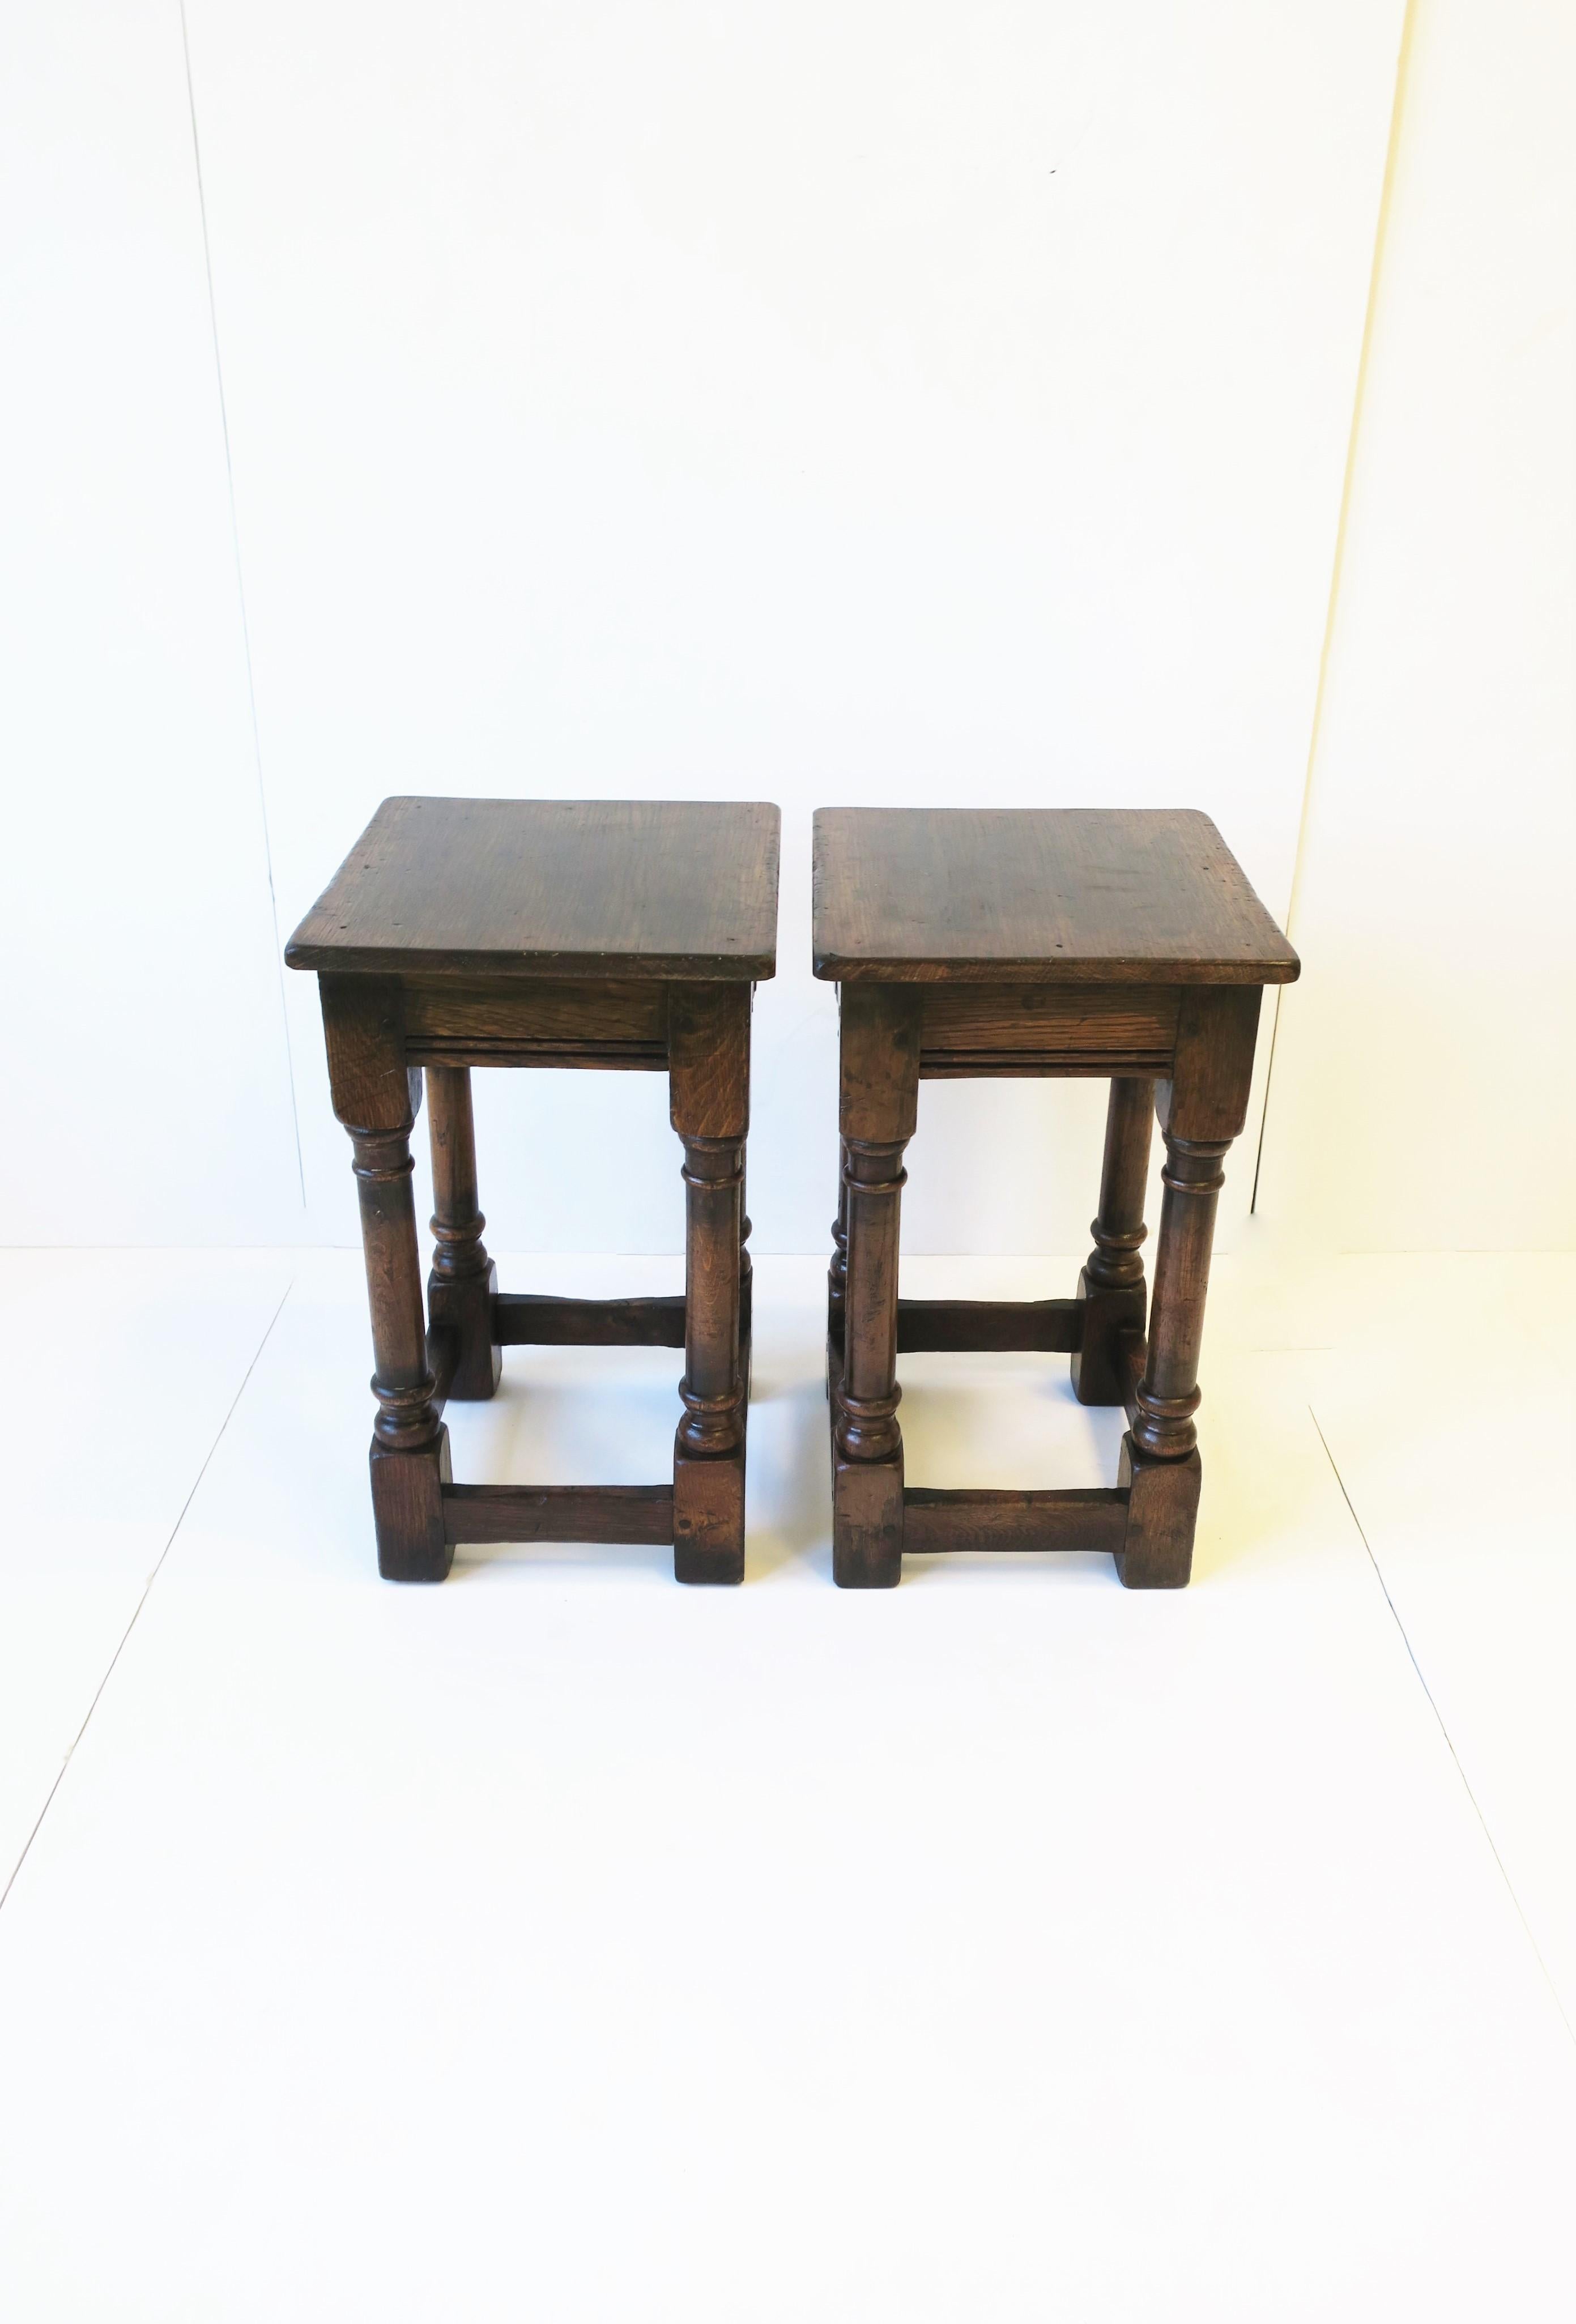 A beautiful and well made pair of Jacobean style wood side tables or stools, circa mid-20th century.

Measurements: 10.5